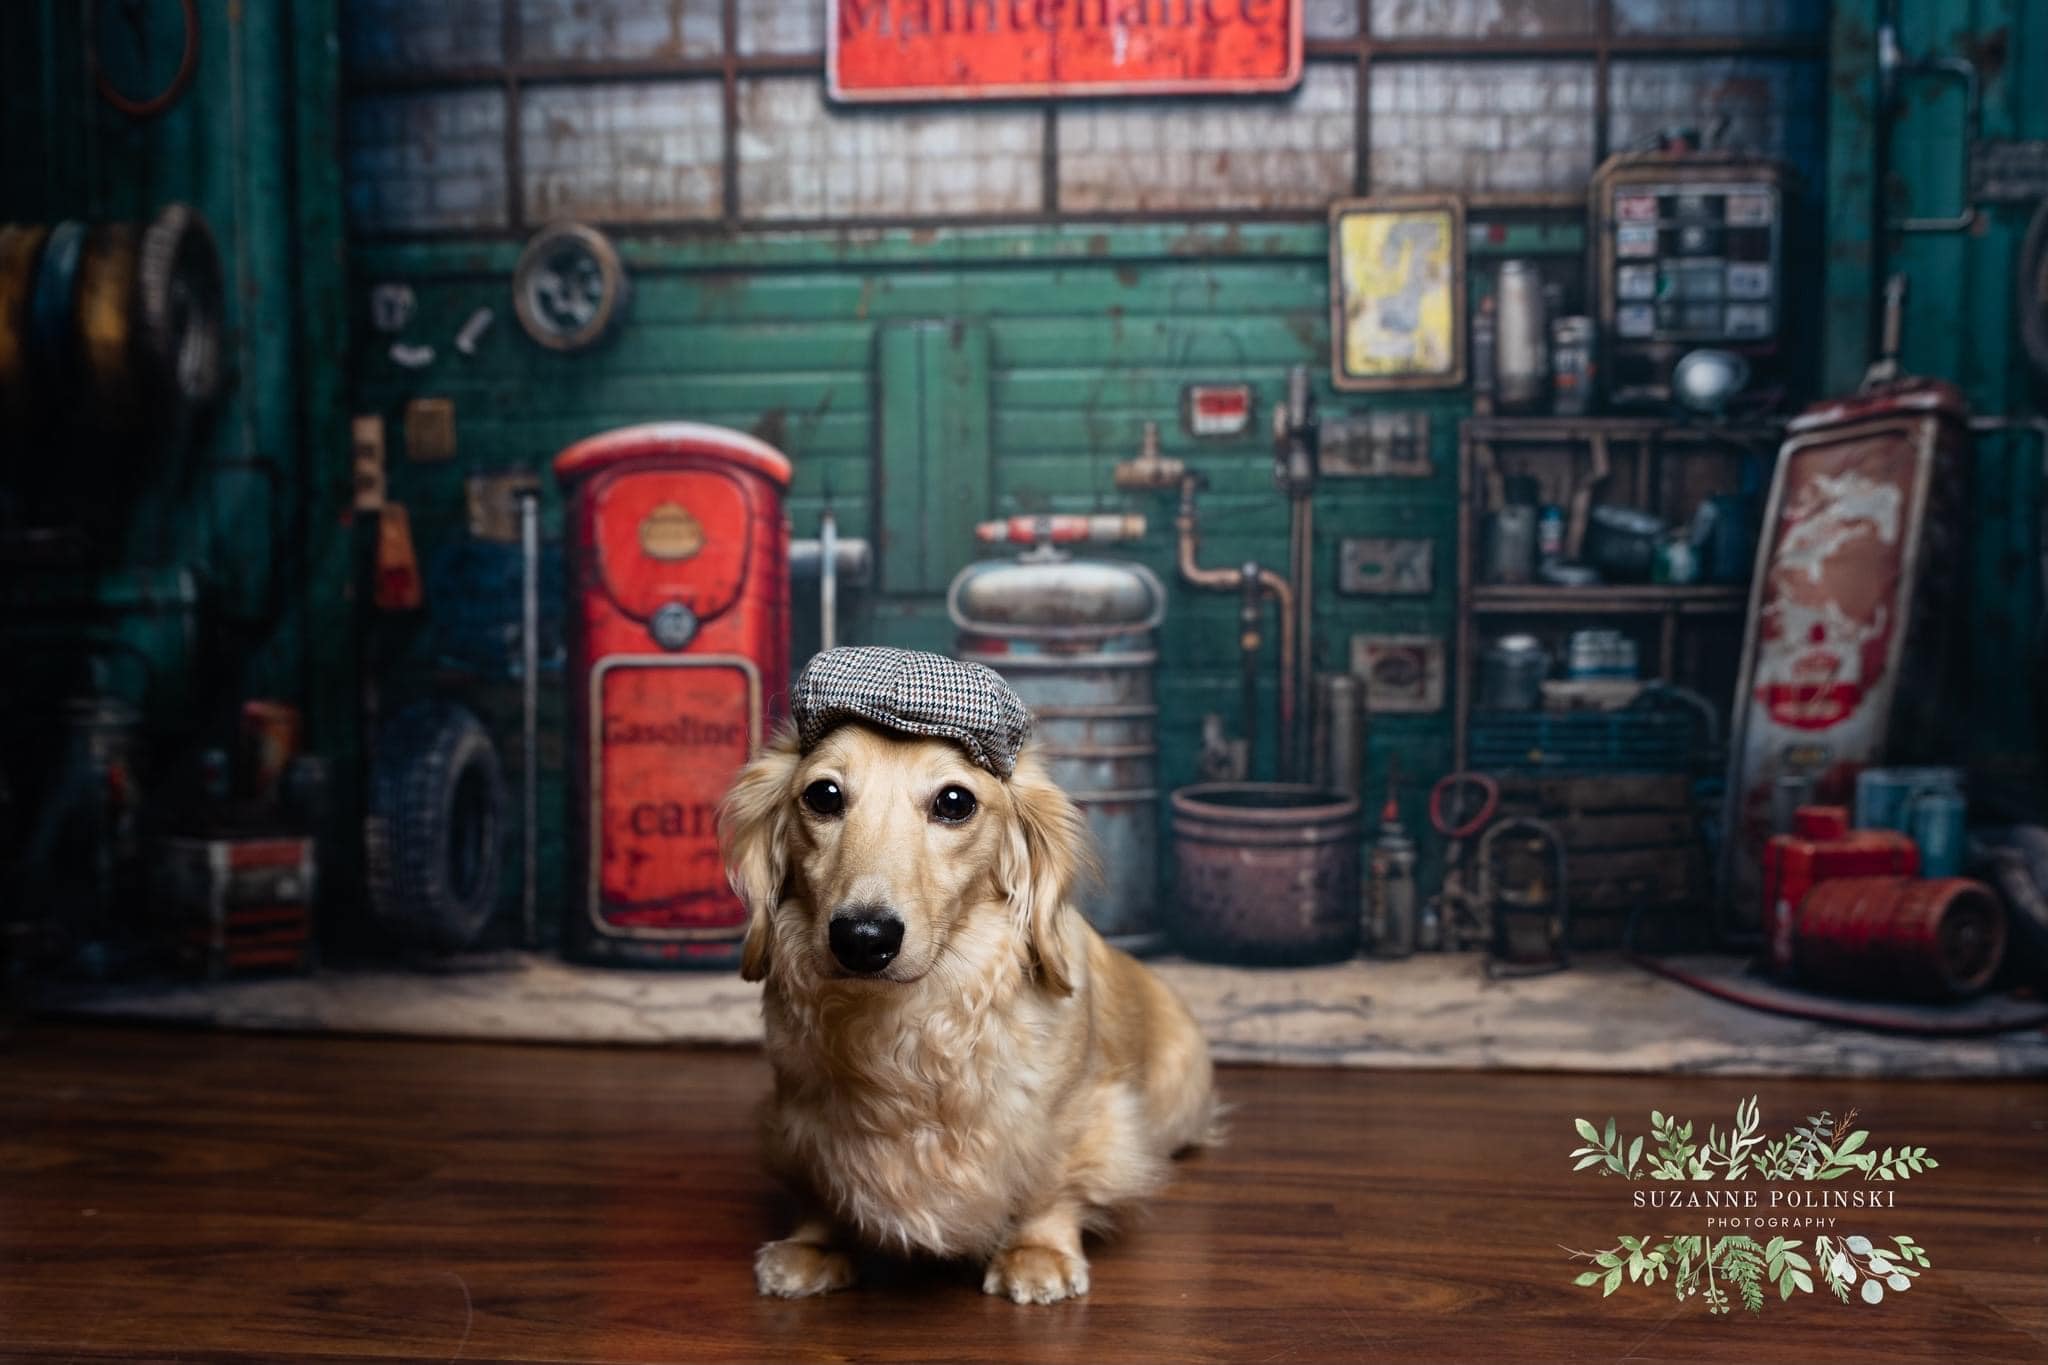 Kate Retro Green Automobile Repair Plant Backdrop Designed by Chain Photography